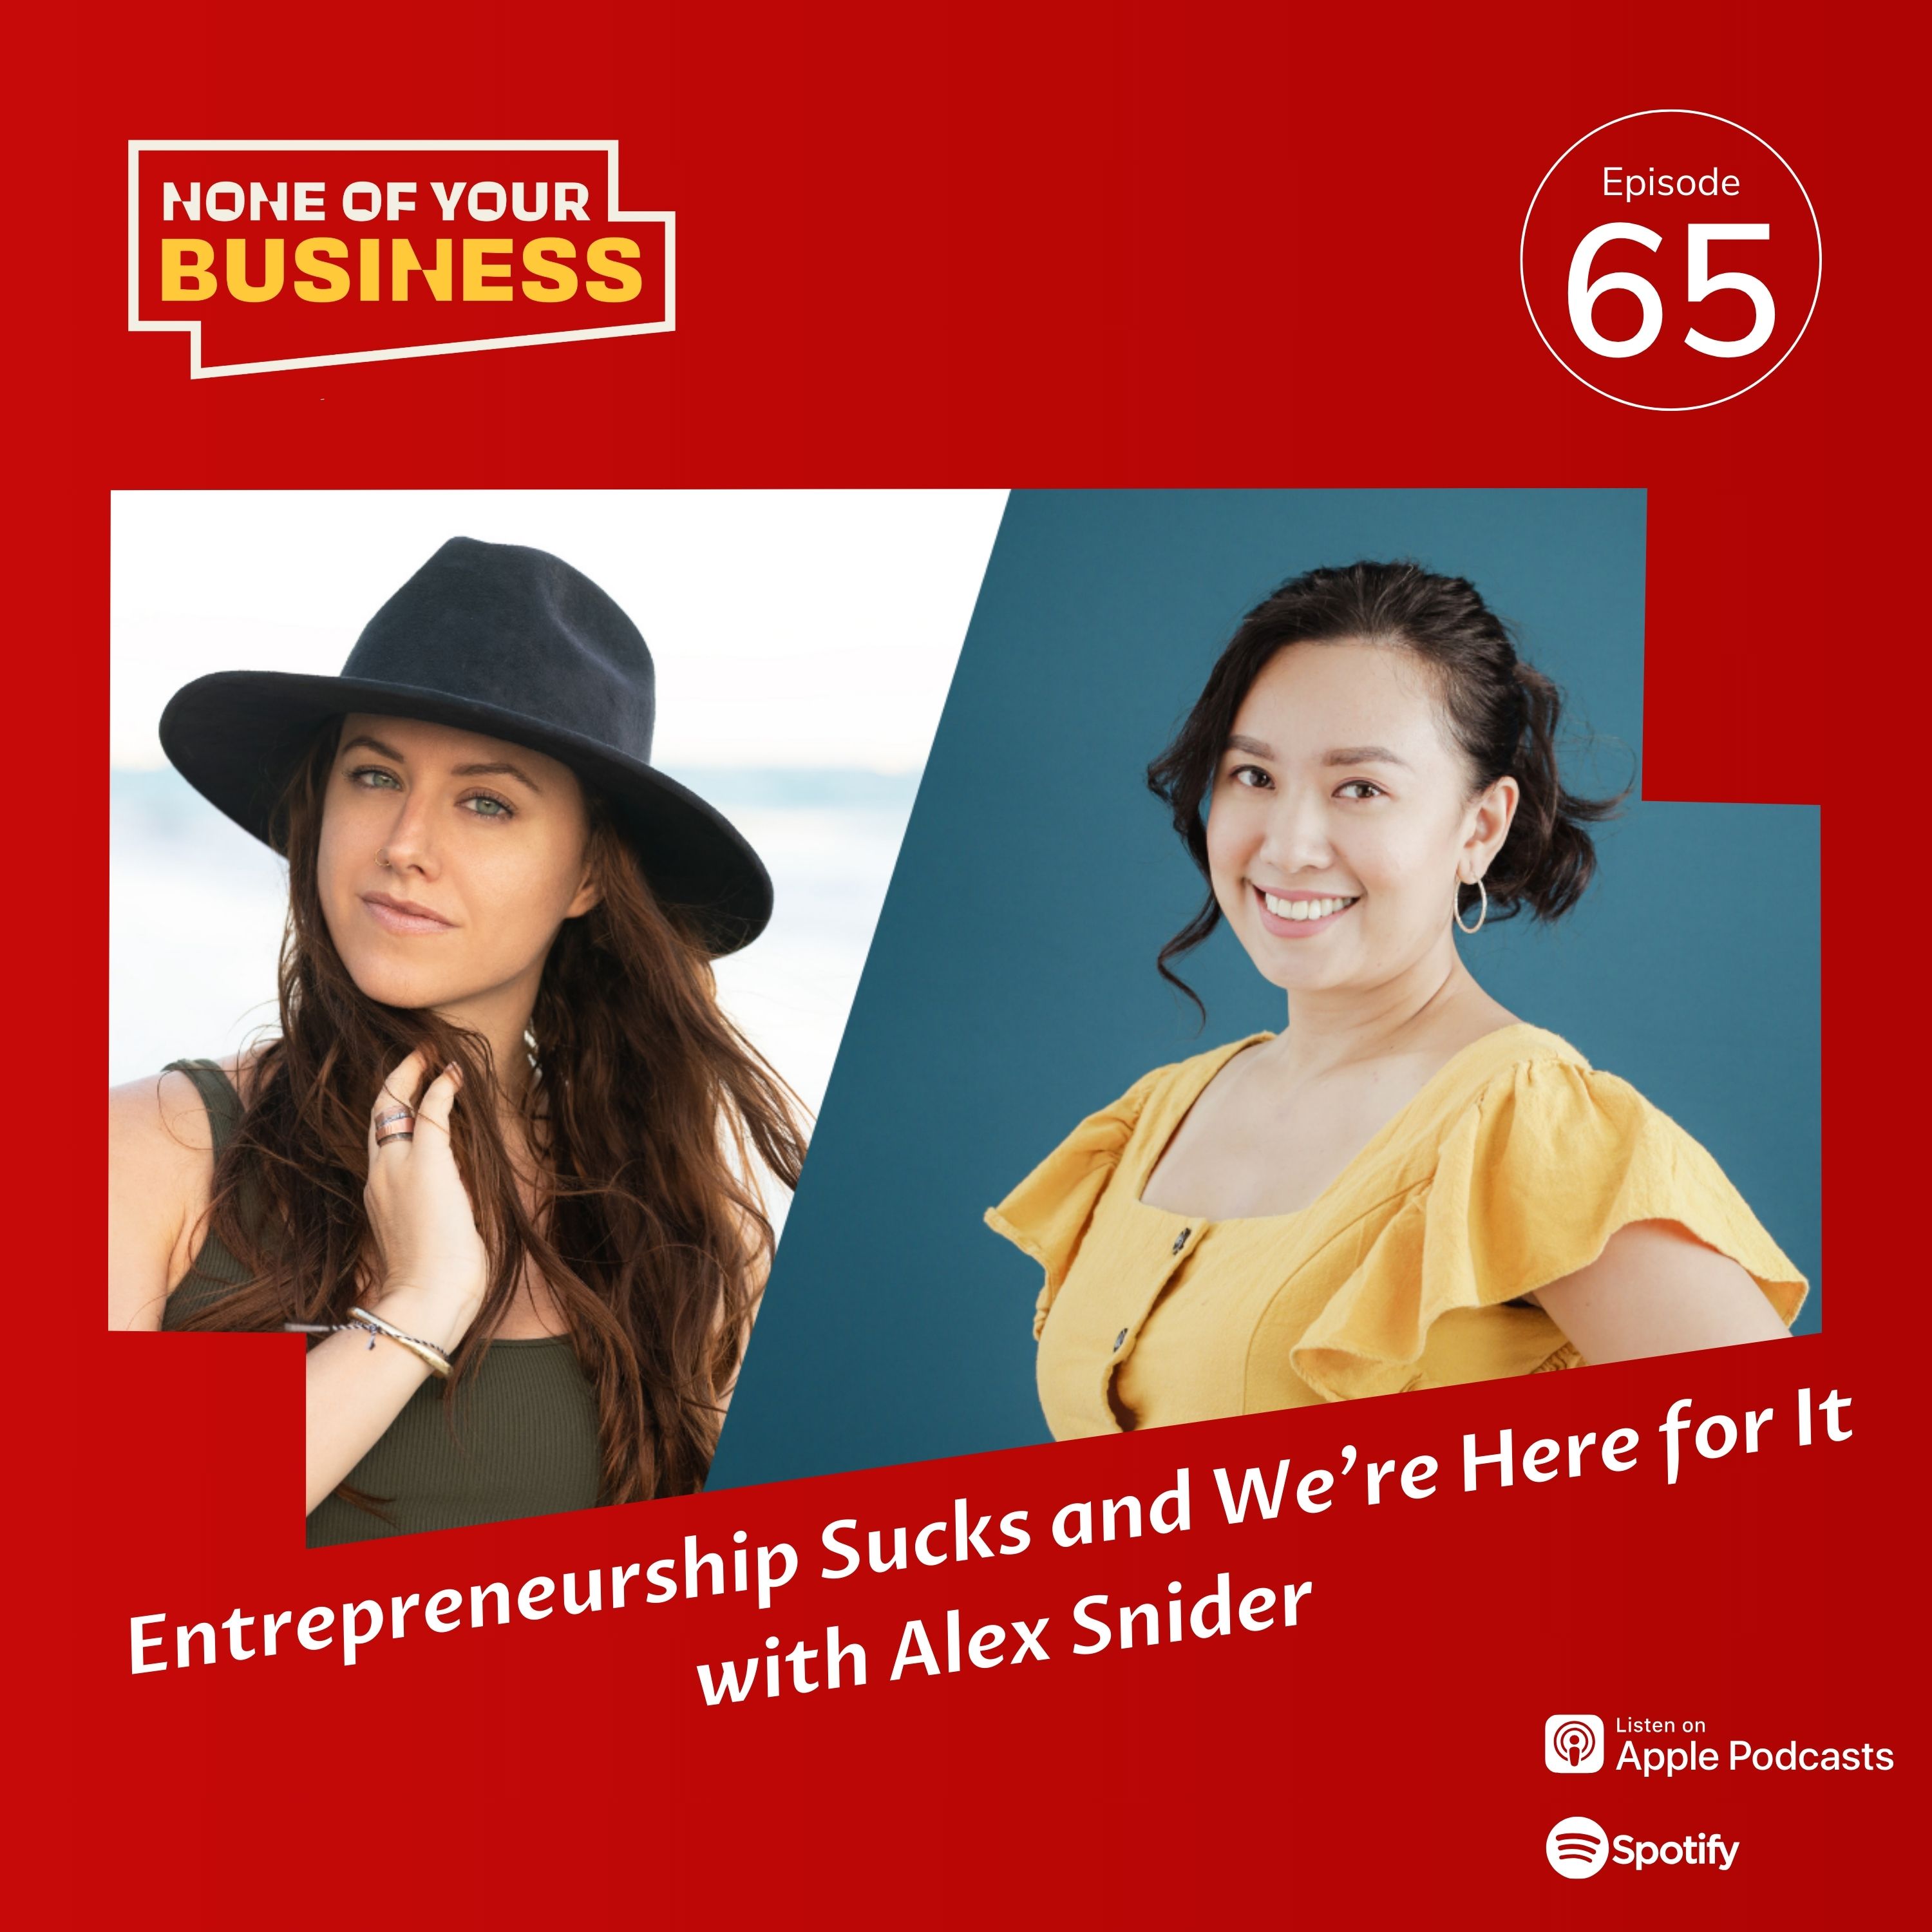 Entrepreneurship Sucks and We're Here for It with Alex Snider